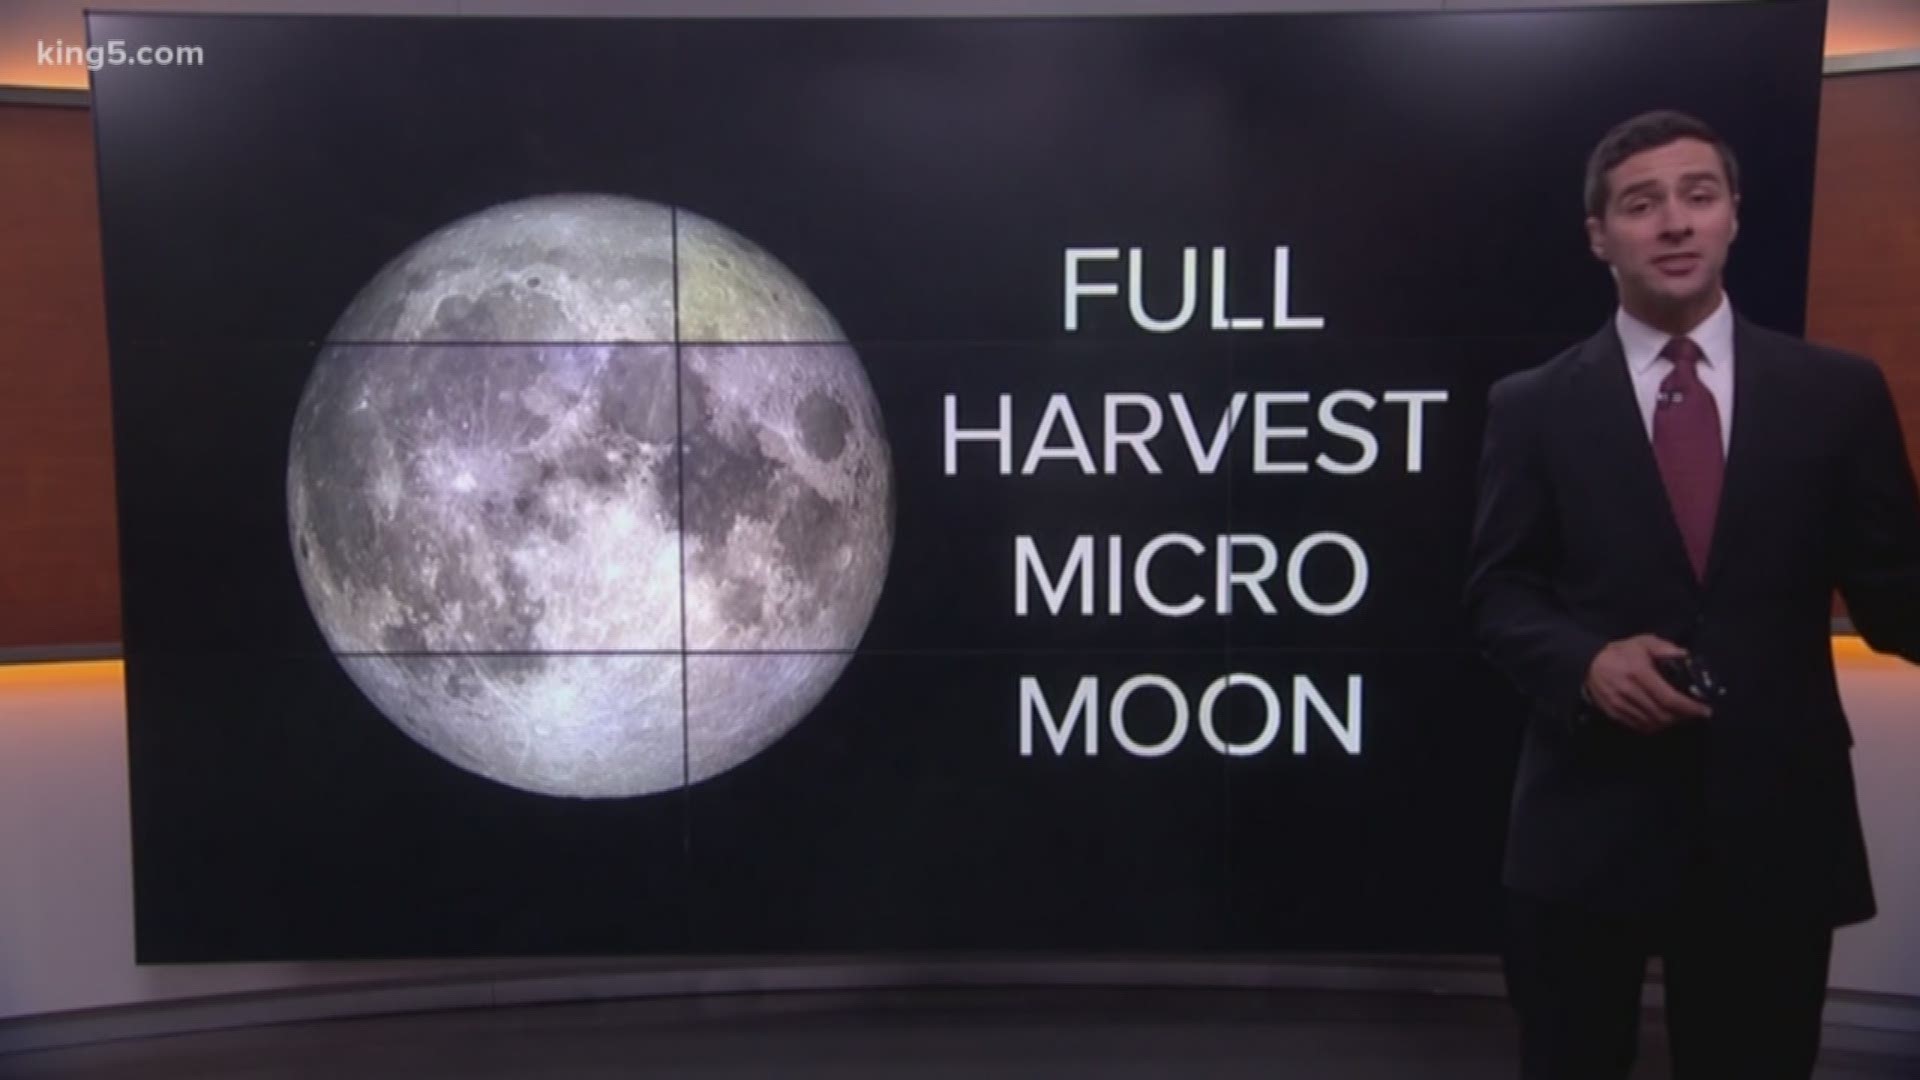 The Friday the 13th full harvest micromoon is pretty rare.  The next micromoon will not be seen until 2020.